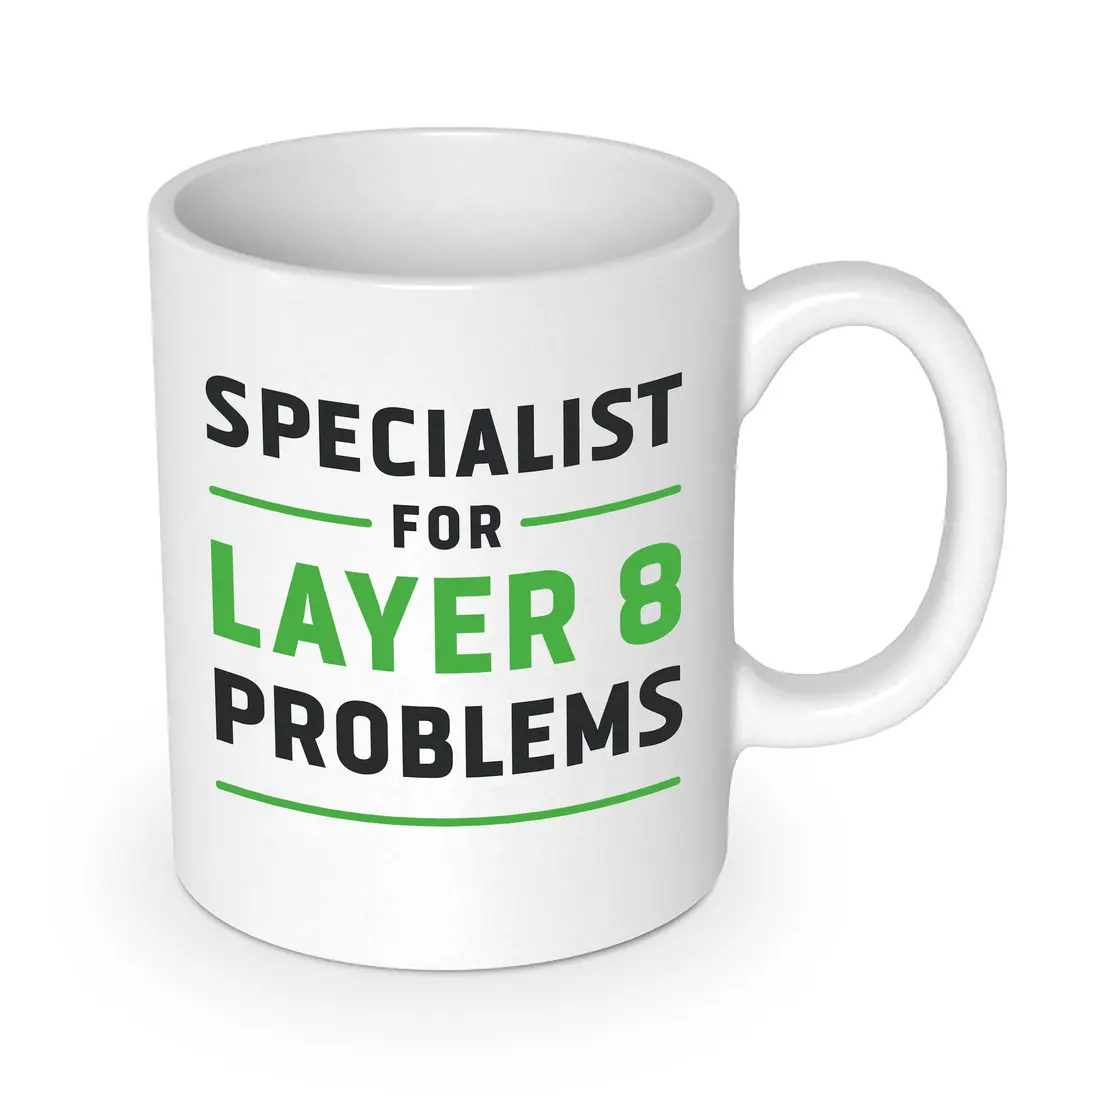 Tasse "Specialist for Layer 8 Problems"